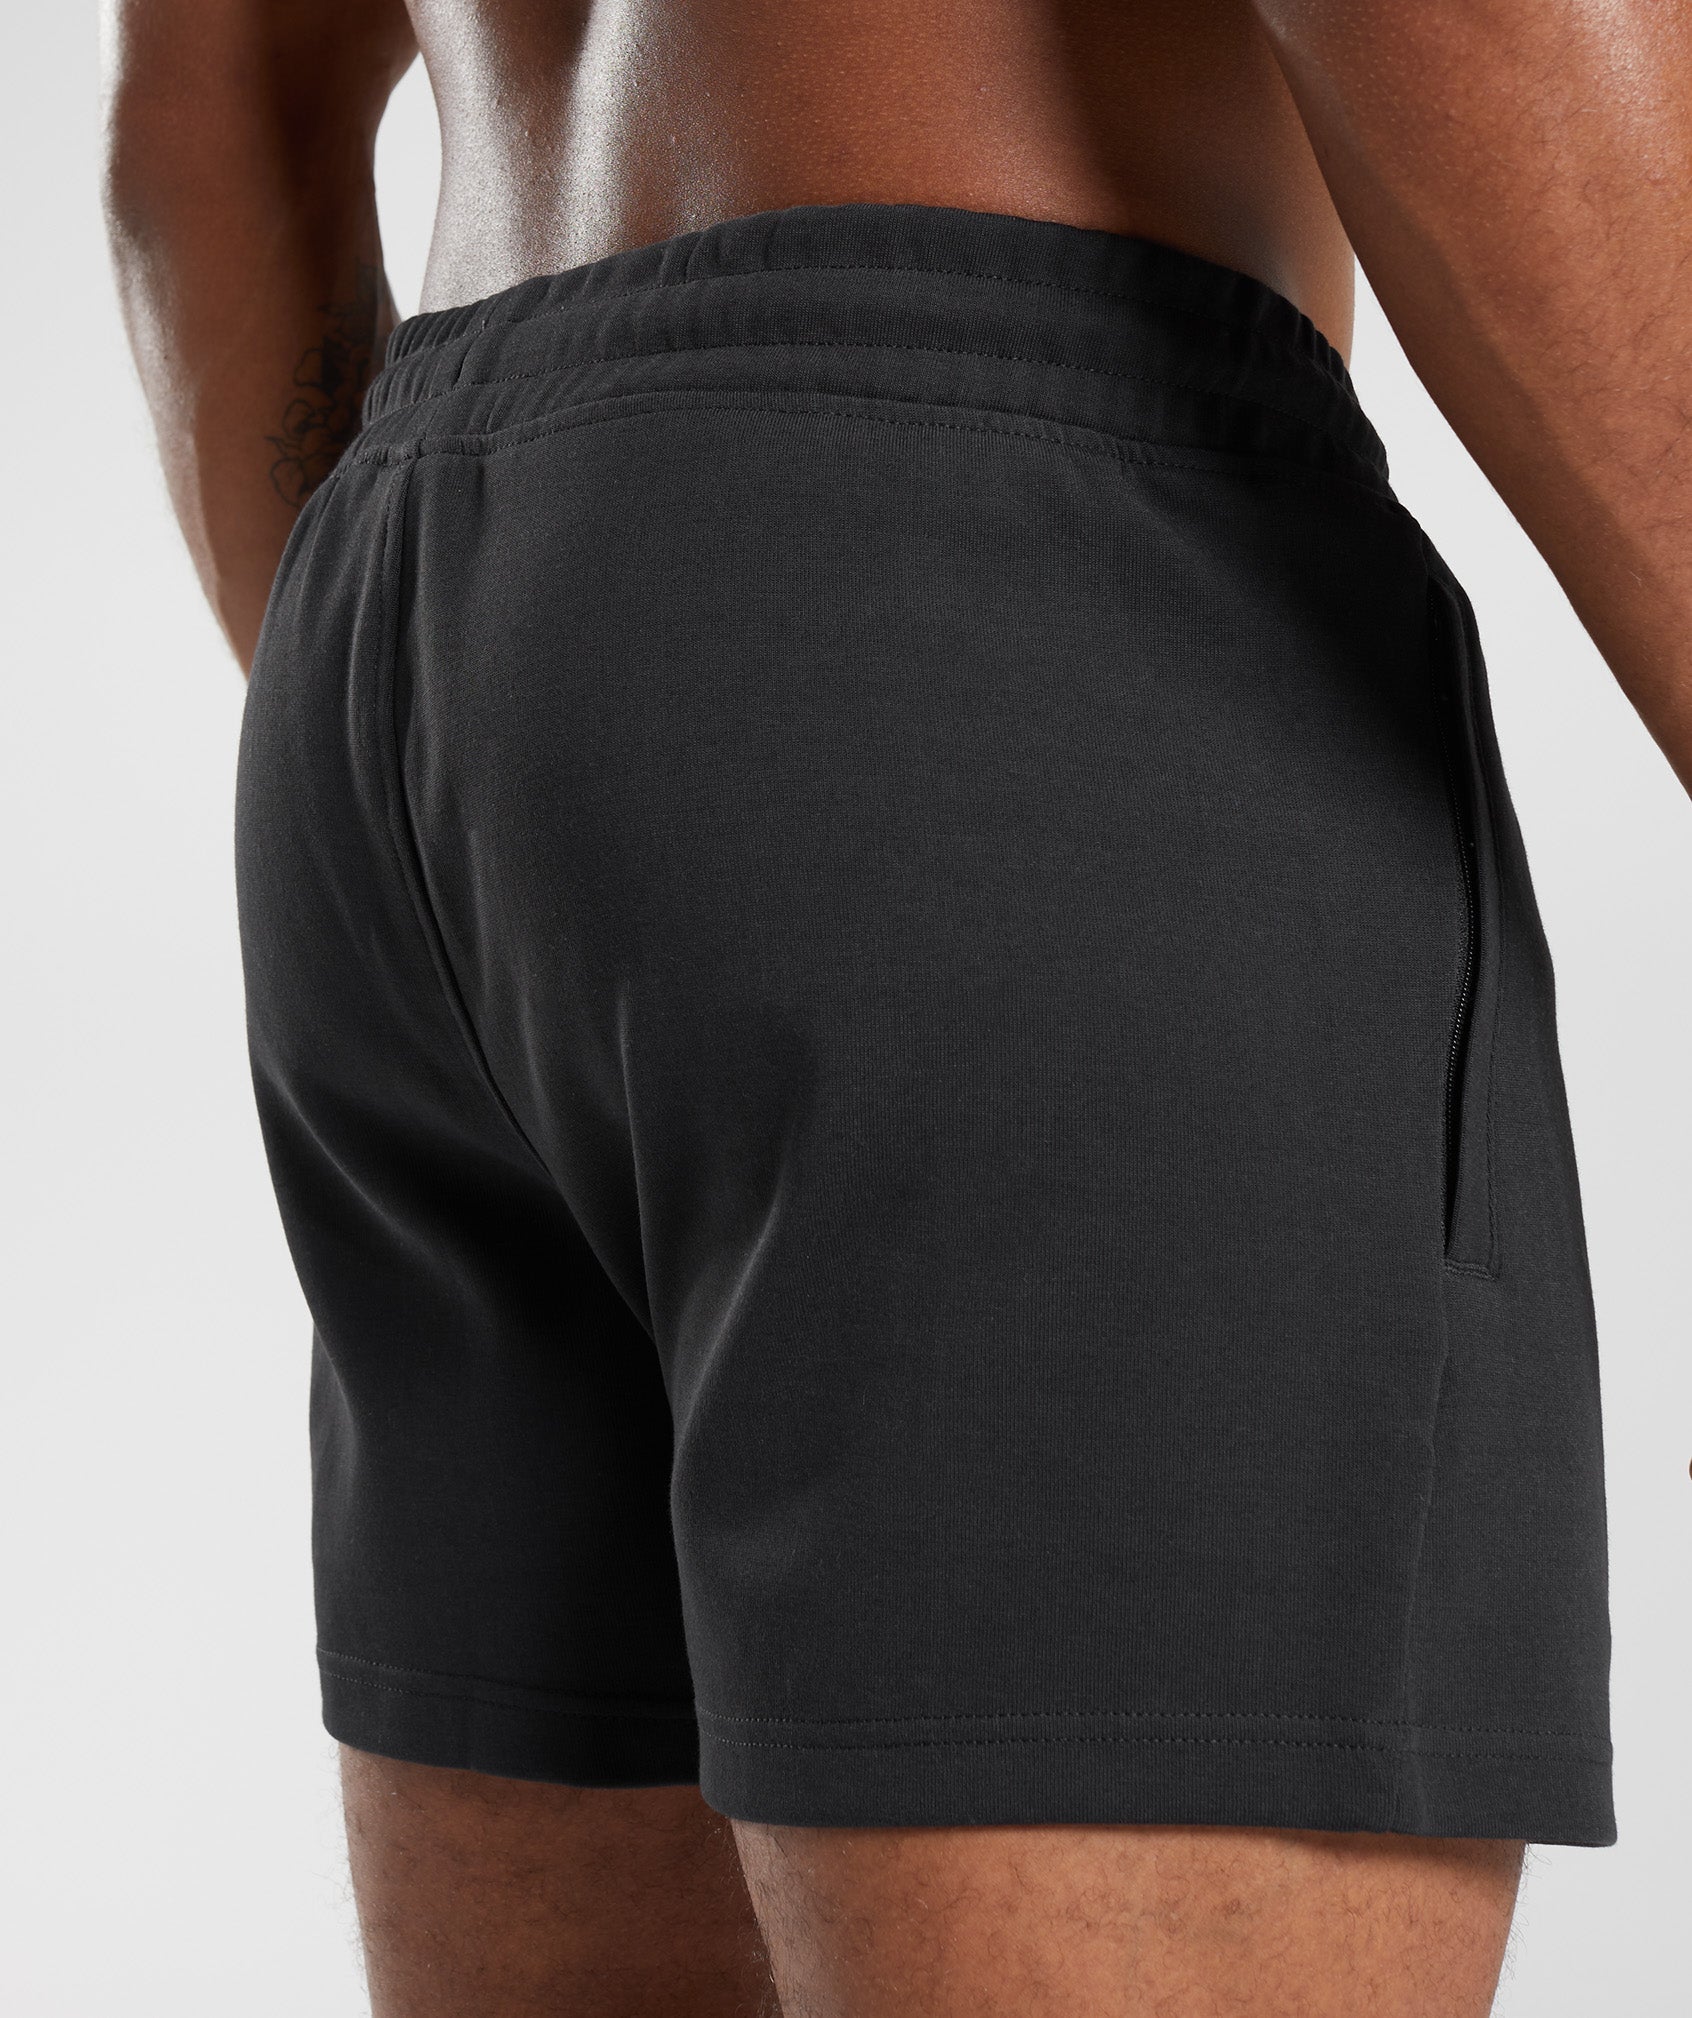 React 5" Shorts in Black - view 4